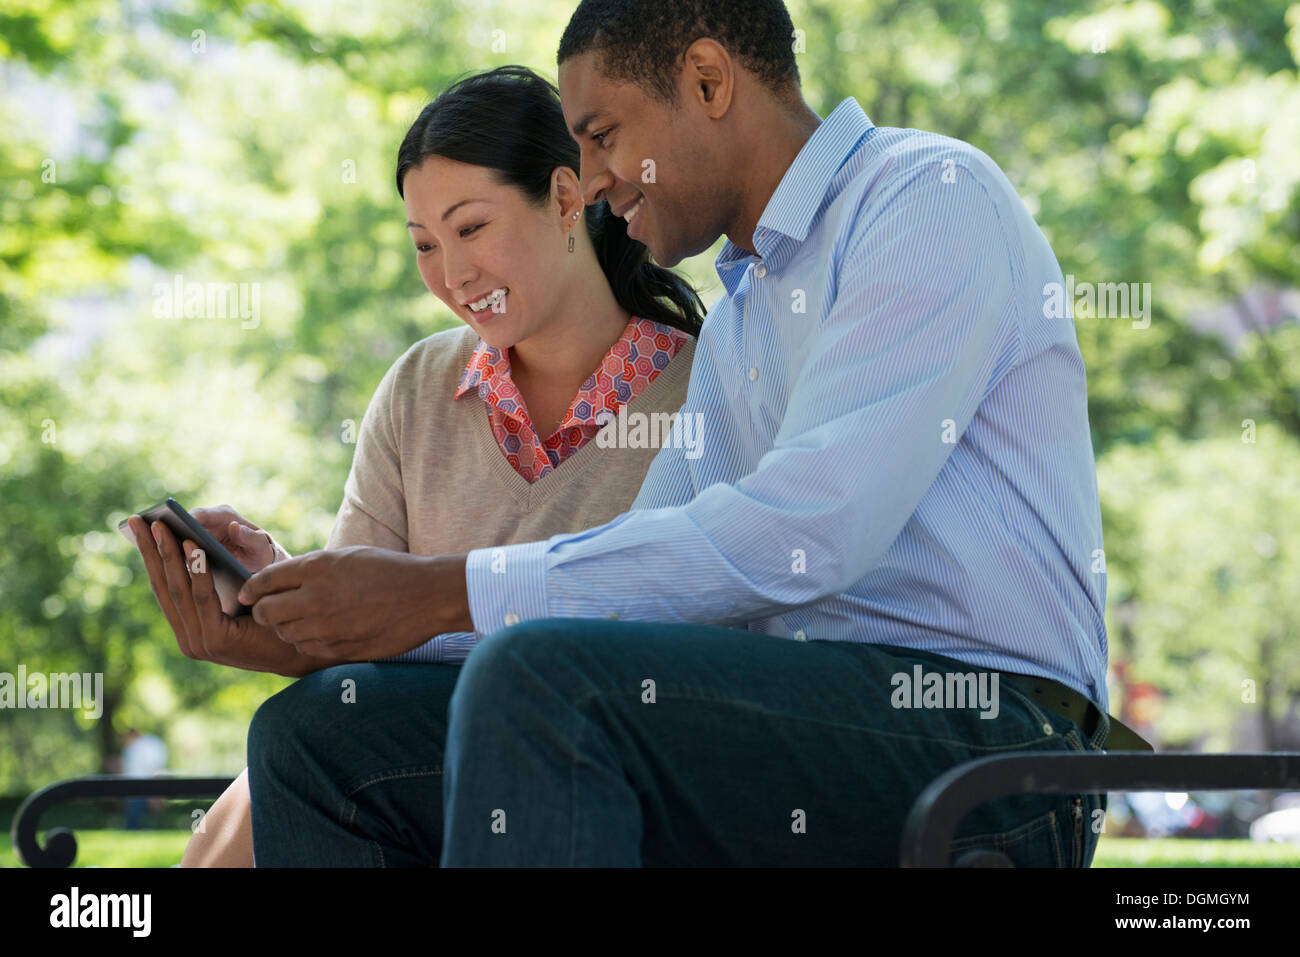 Summer. Business people. A man and woman sitting on a bench, using a smart phone. Stock Photo